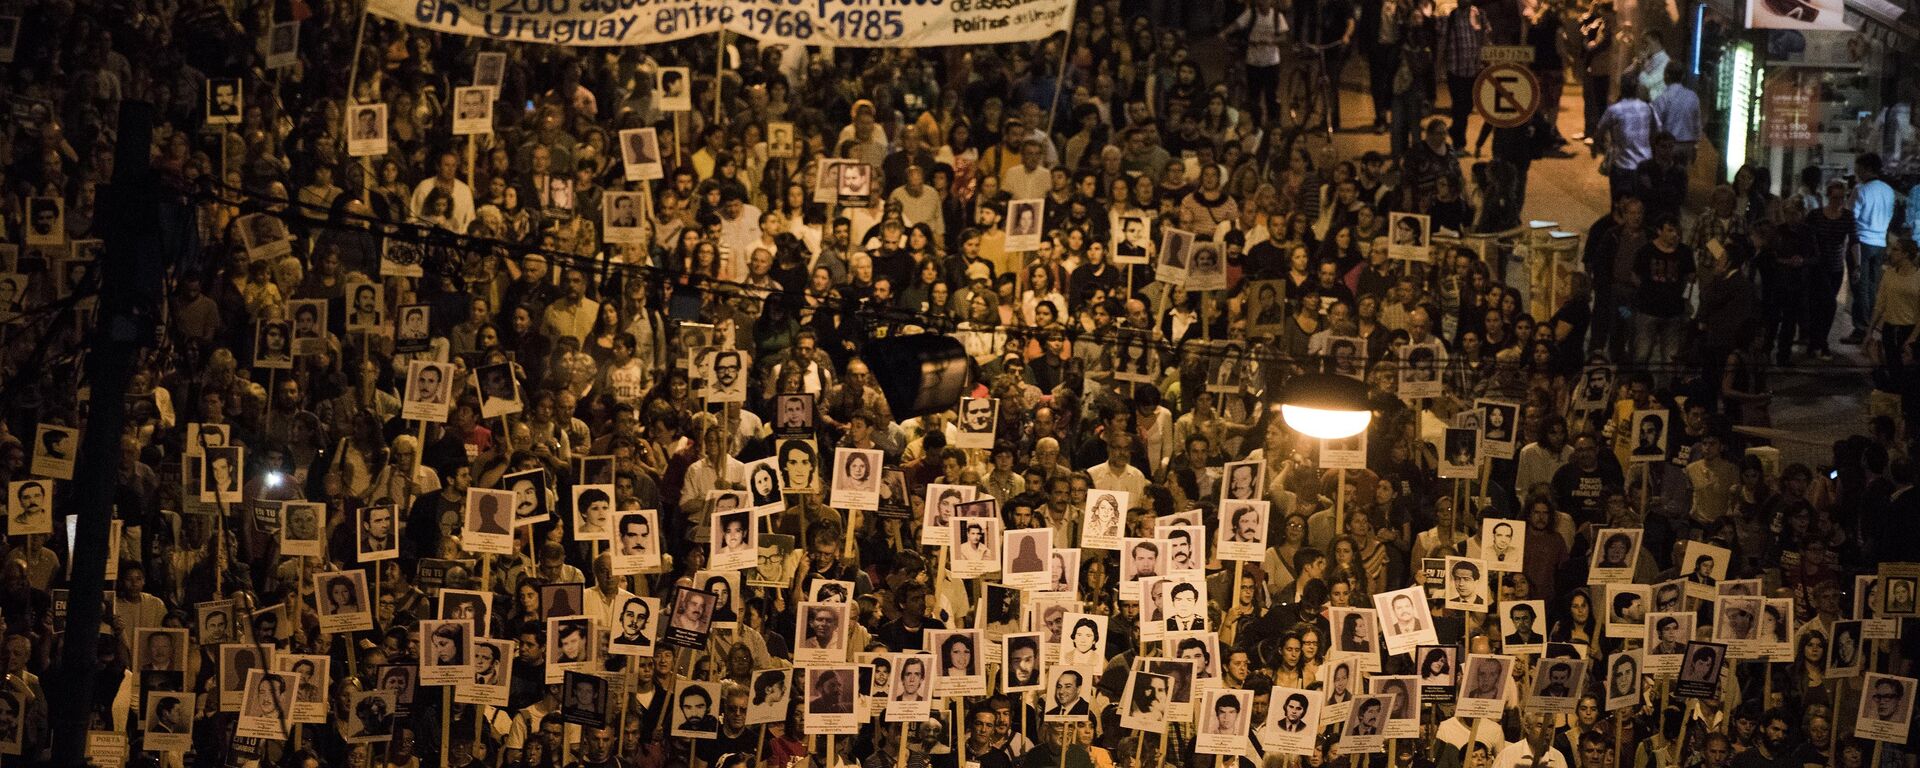 Demonstrators take part in the 20th March of Silence in Montevideo, Uruguay, Wednesday, May 20, 2015.  - Sputnik Mundo, 1920, 20.05.2022